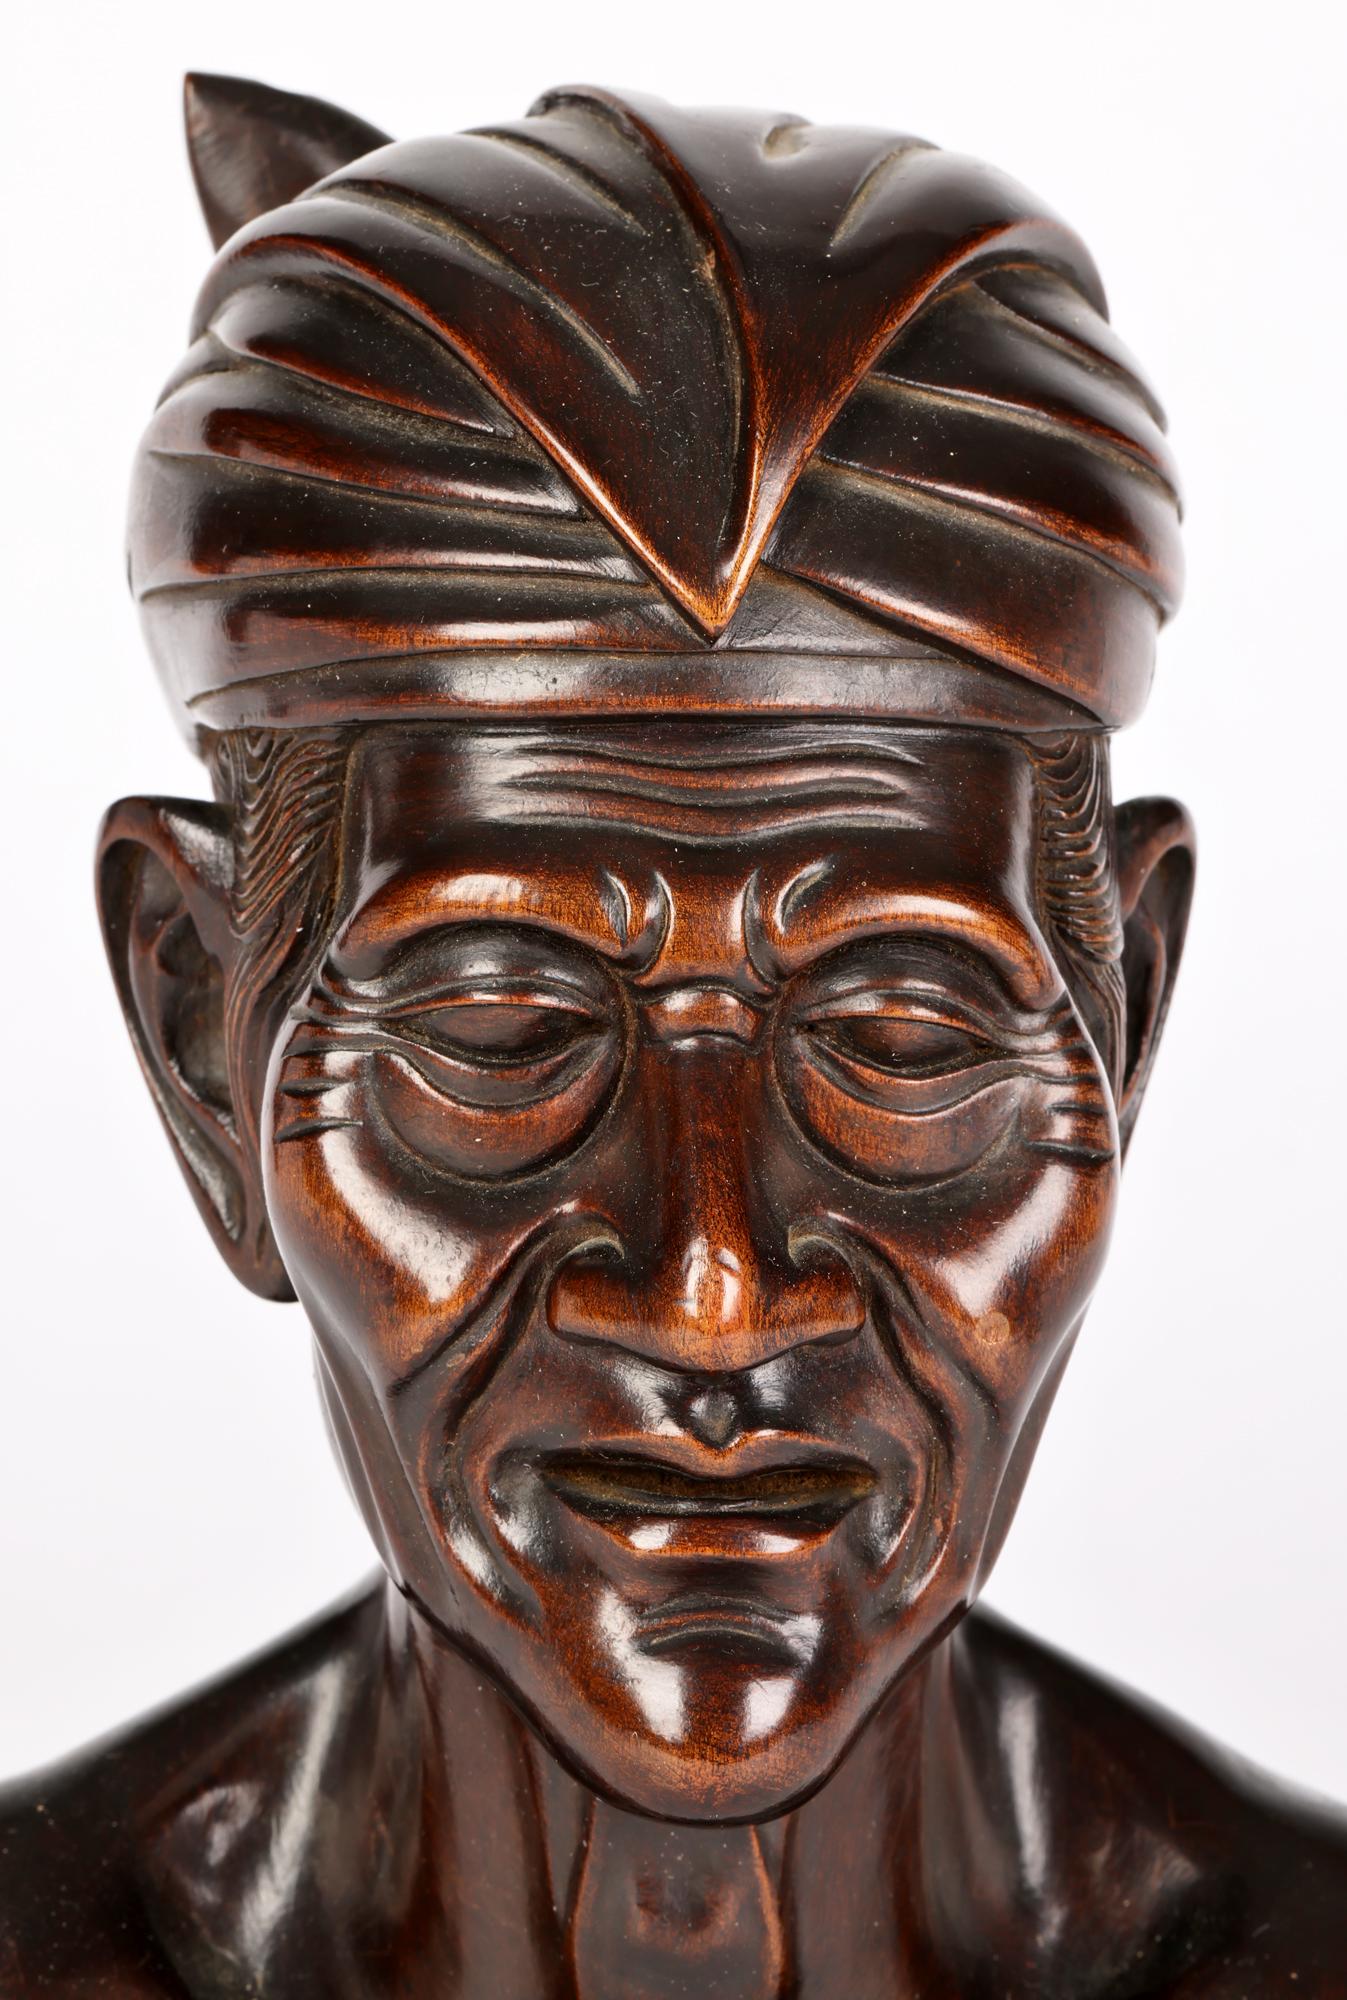 A well carved wooden portrait bust of an elderly man carved by a Balinese artist around the mid 20th century. The bust is carved from a single piece if wood and is well carved with good detail portraying the man wearing a traditional headdress.